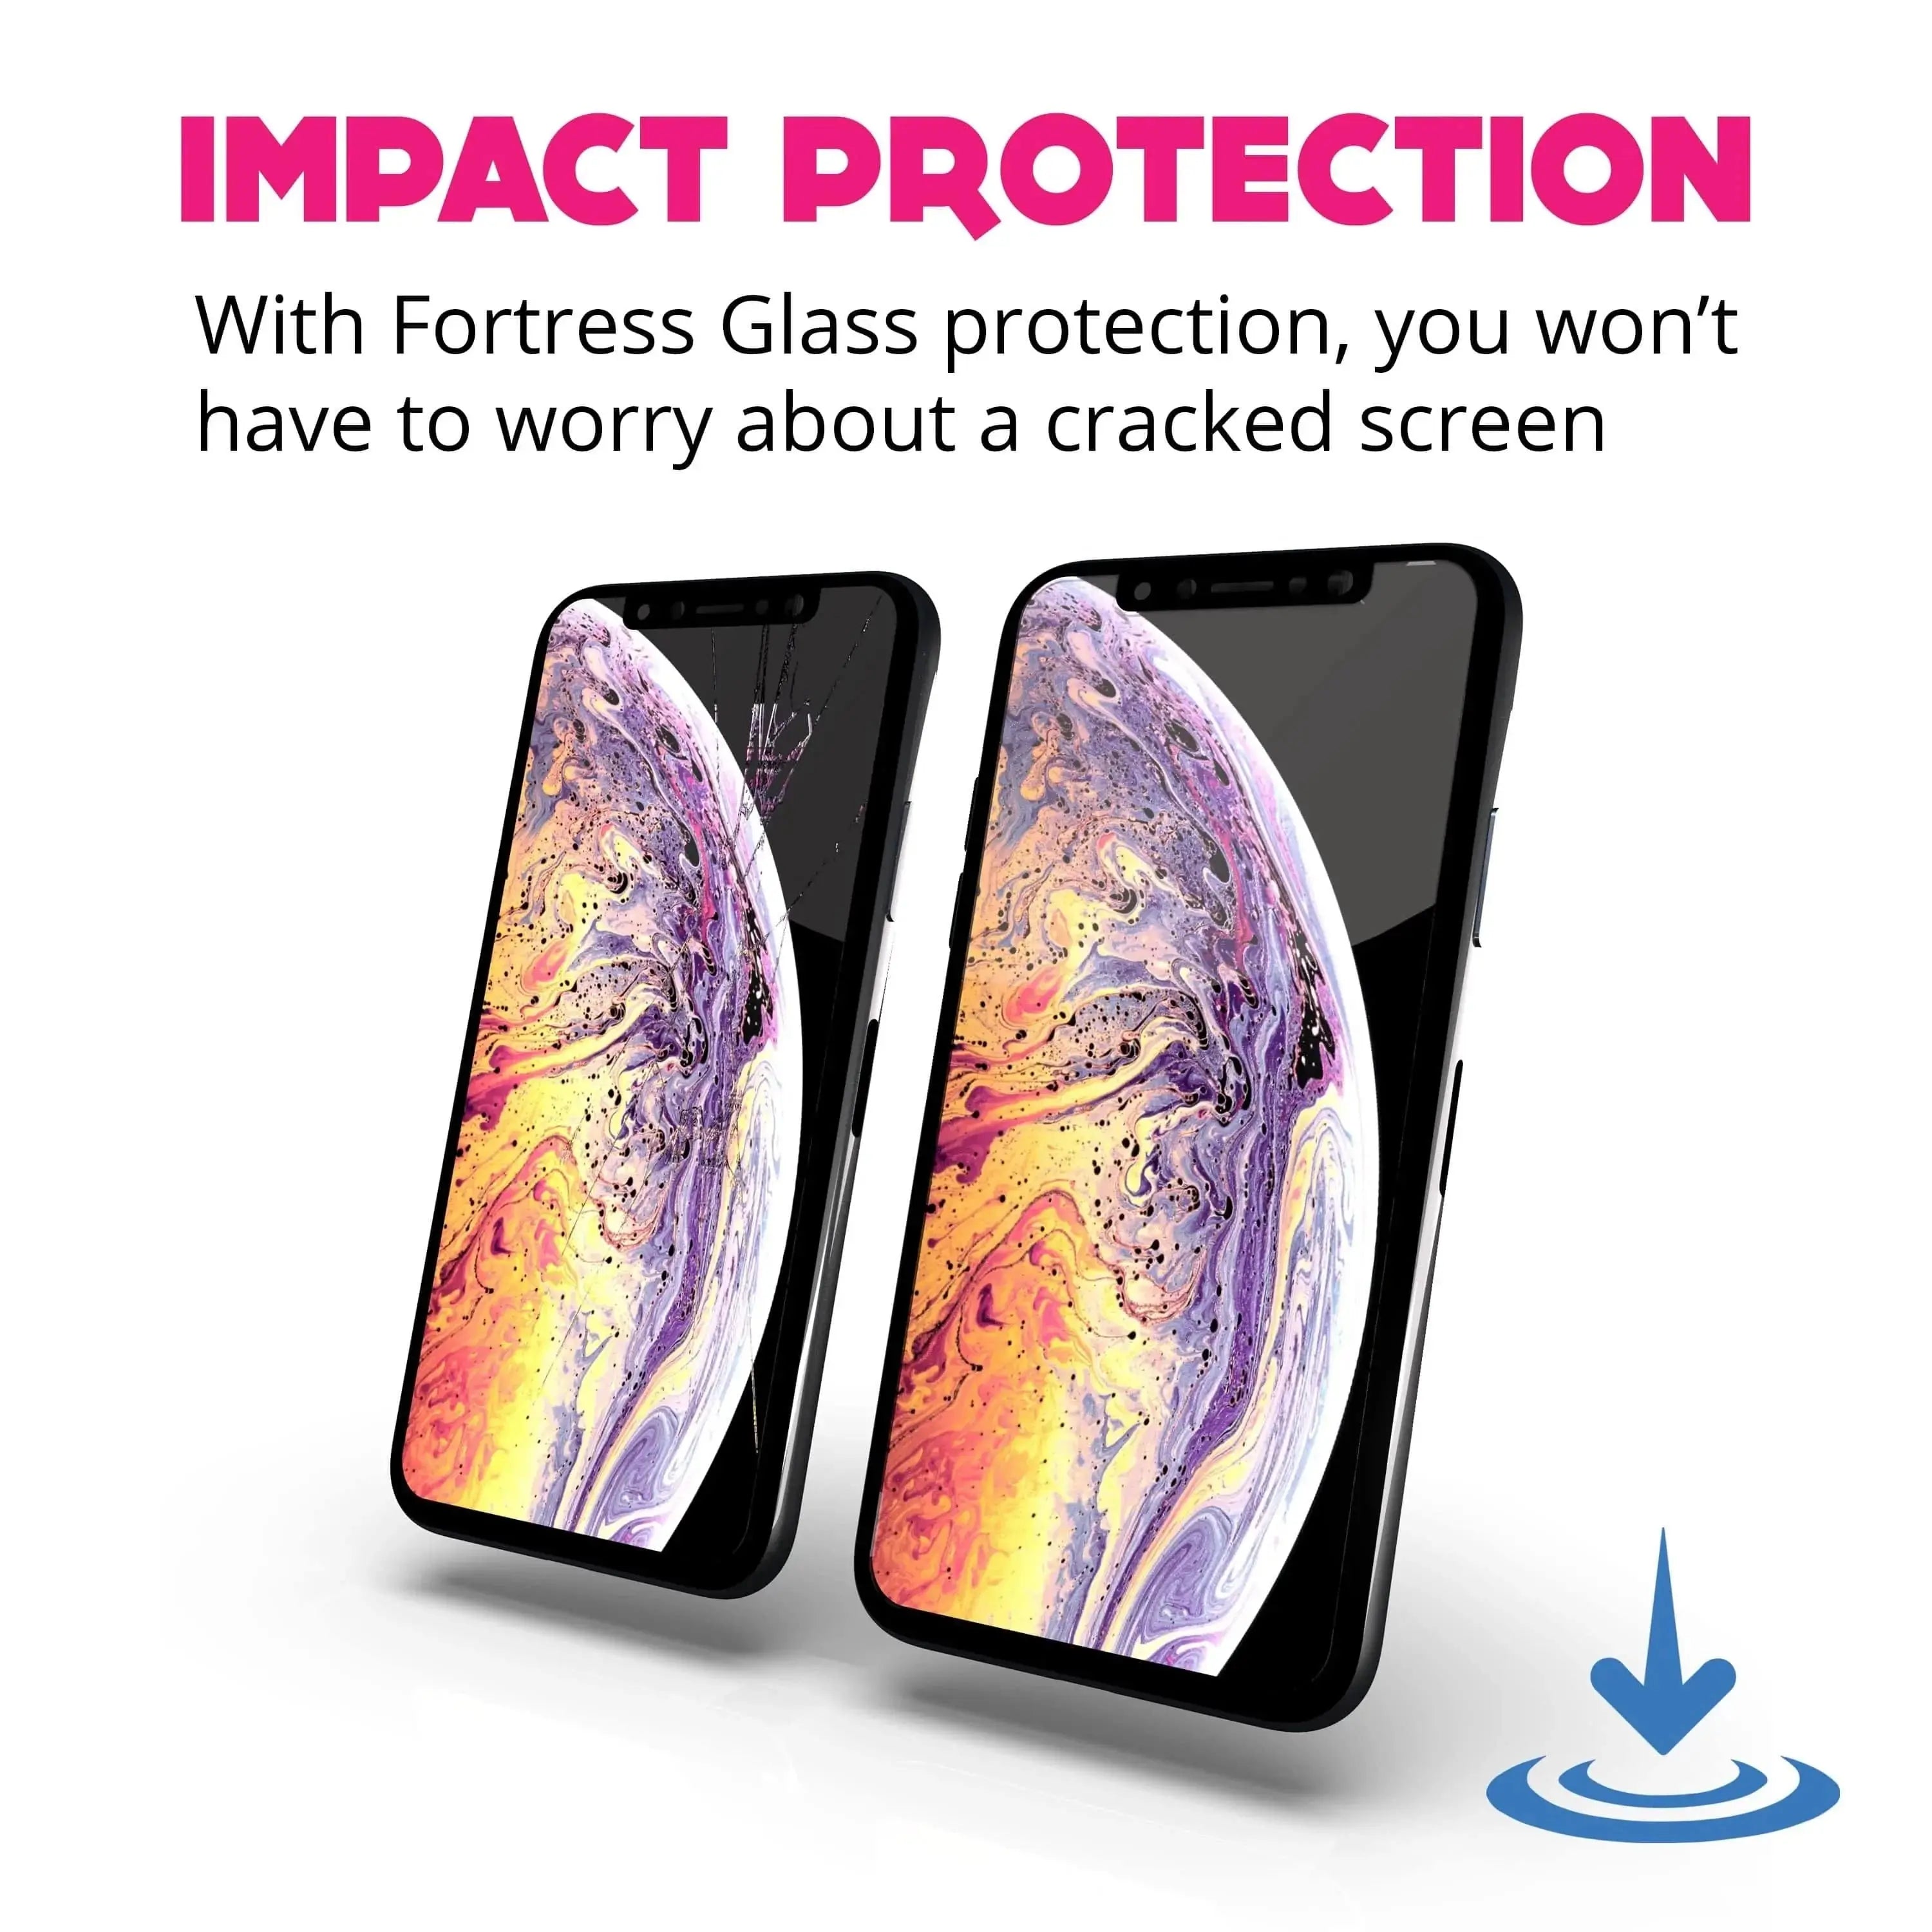 Fortress Samsung Galaxy S23+ Screen Protector - $200 Device Coverage  Scooch Screen Protector